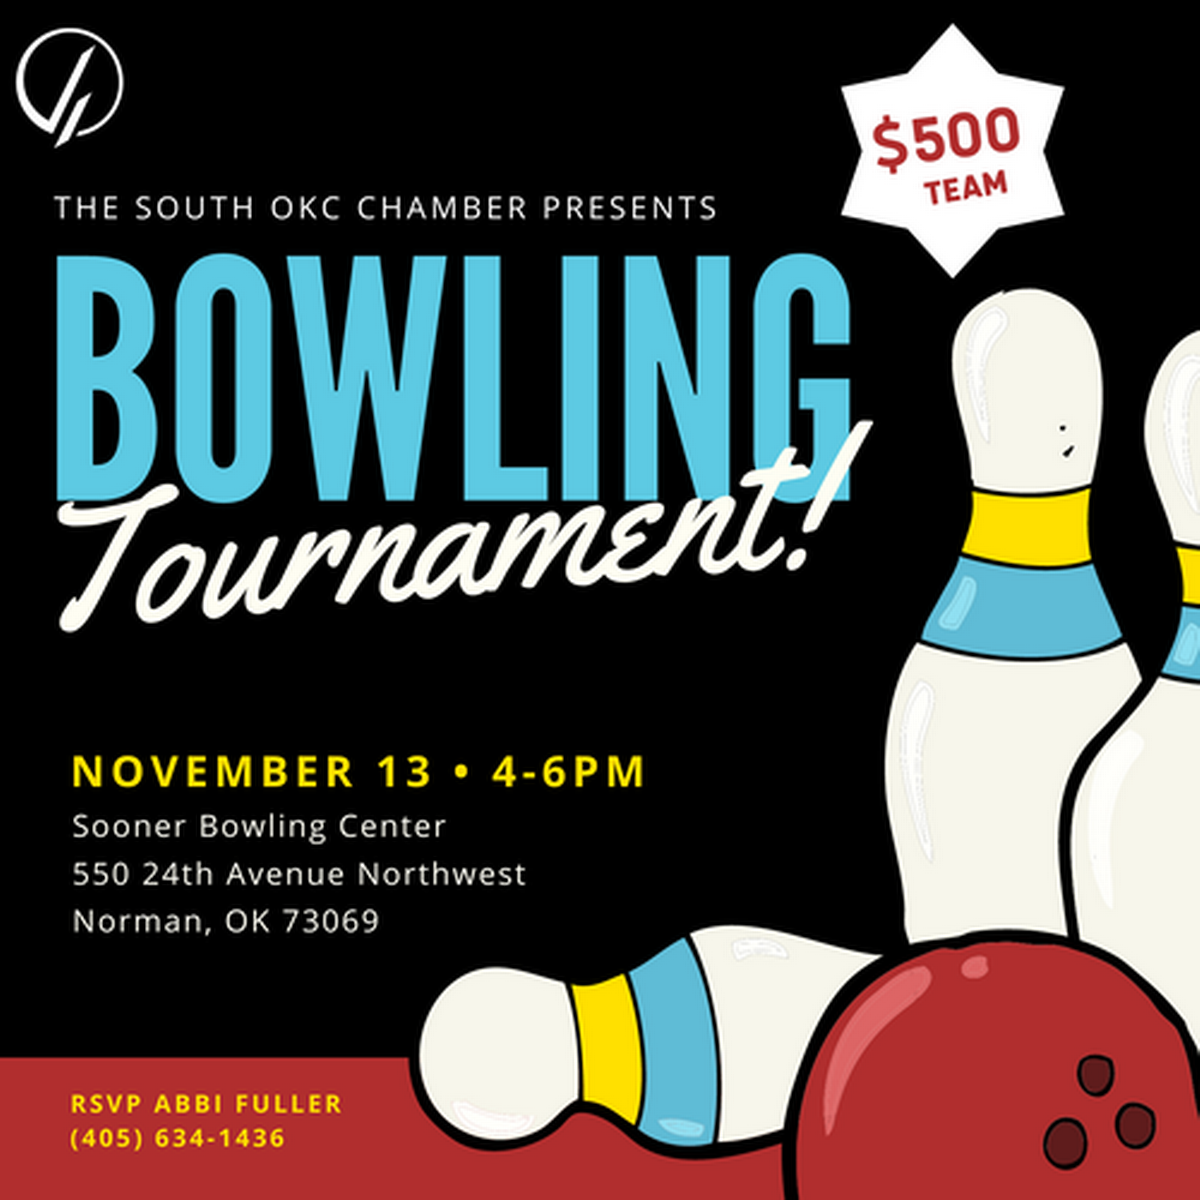 Tourneybowl - Your Home for Bowling Tournaments